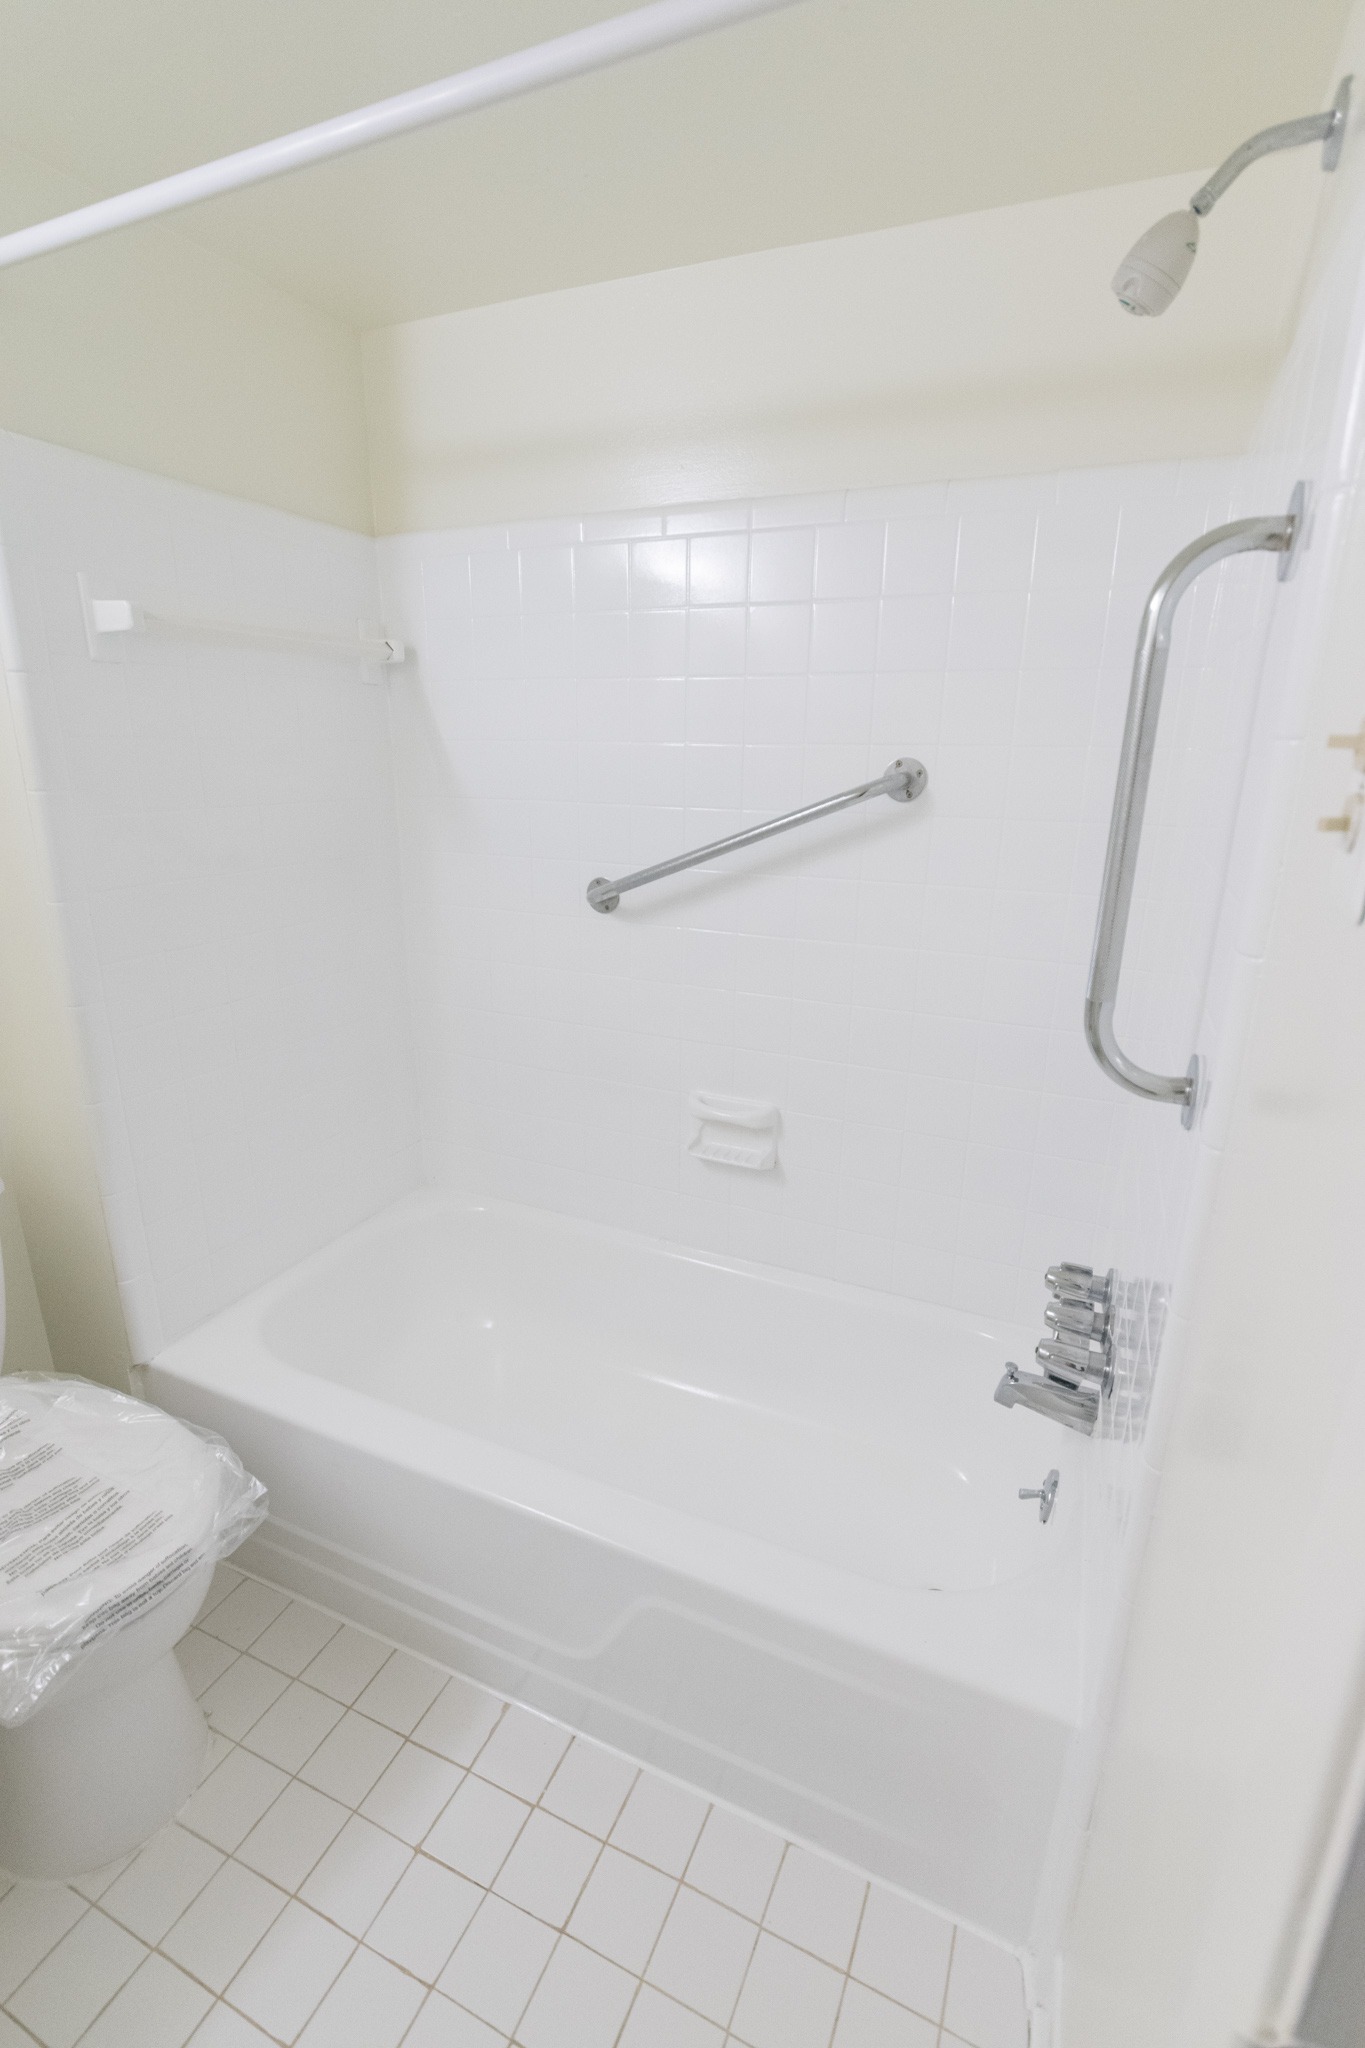 Willow Run Apartments white tiled bathroom with bath and shower